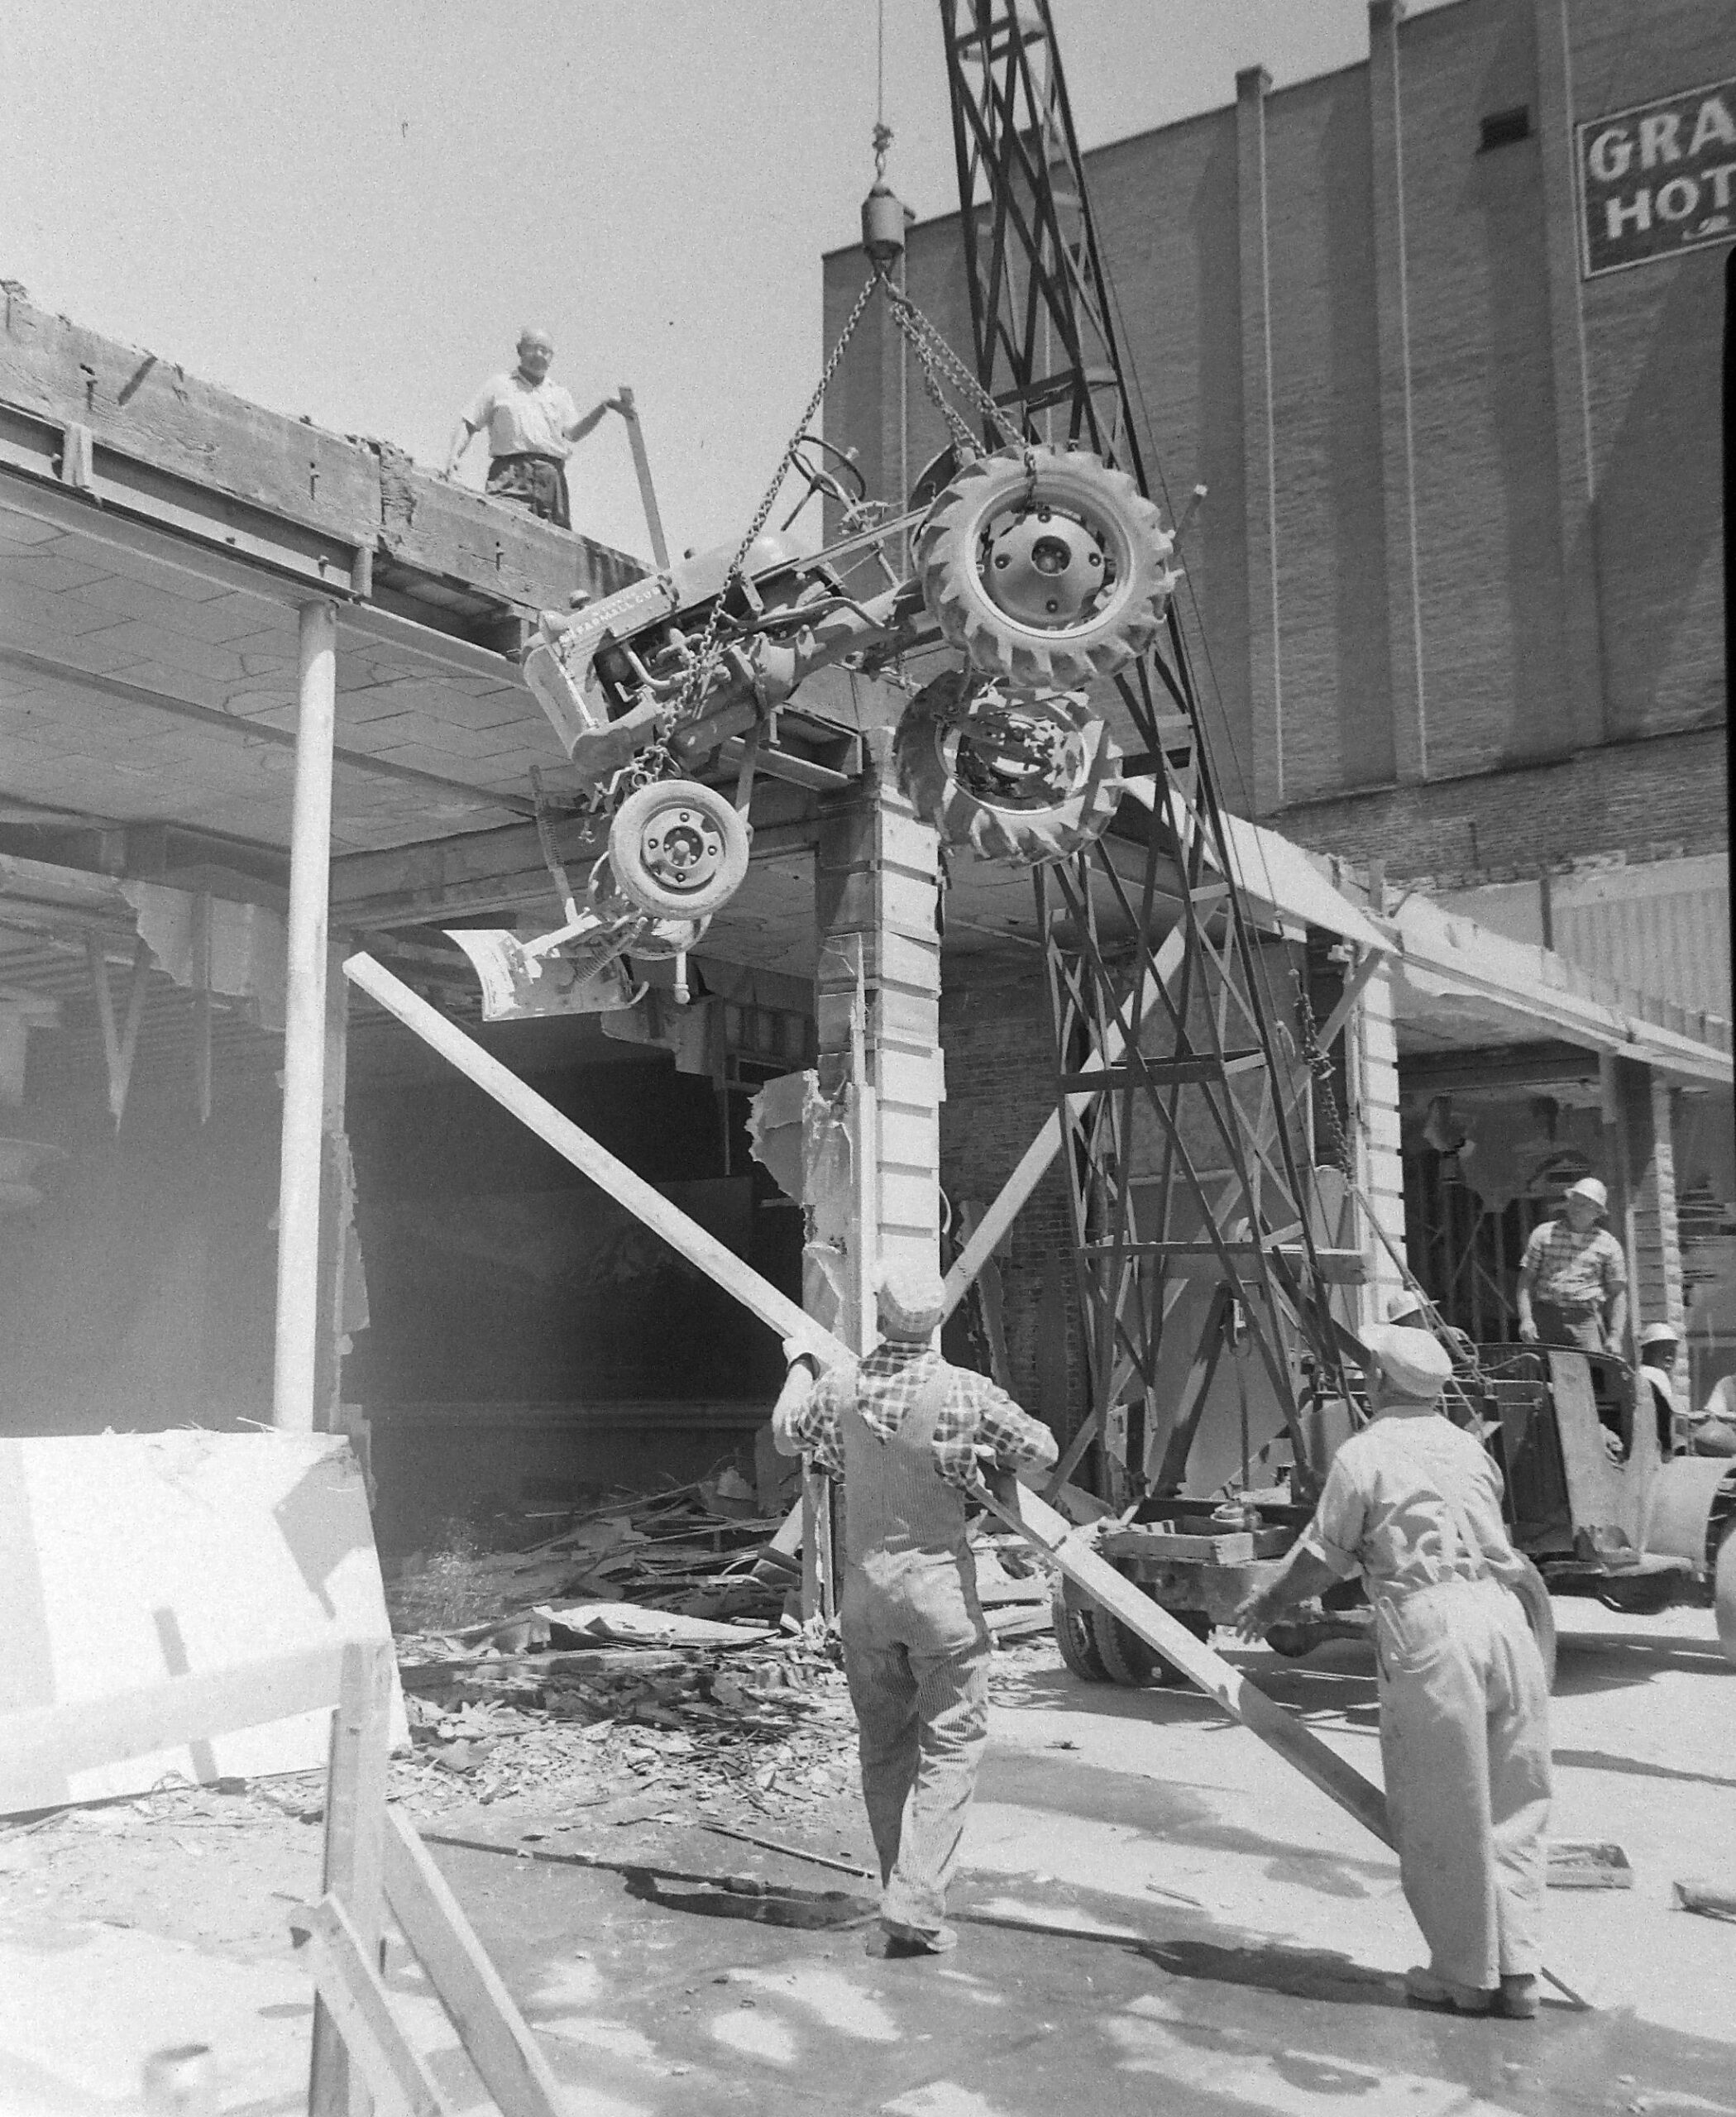 Eagles Building tractor falls from roof Jun 1960